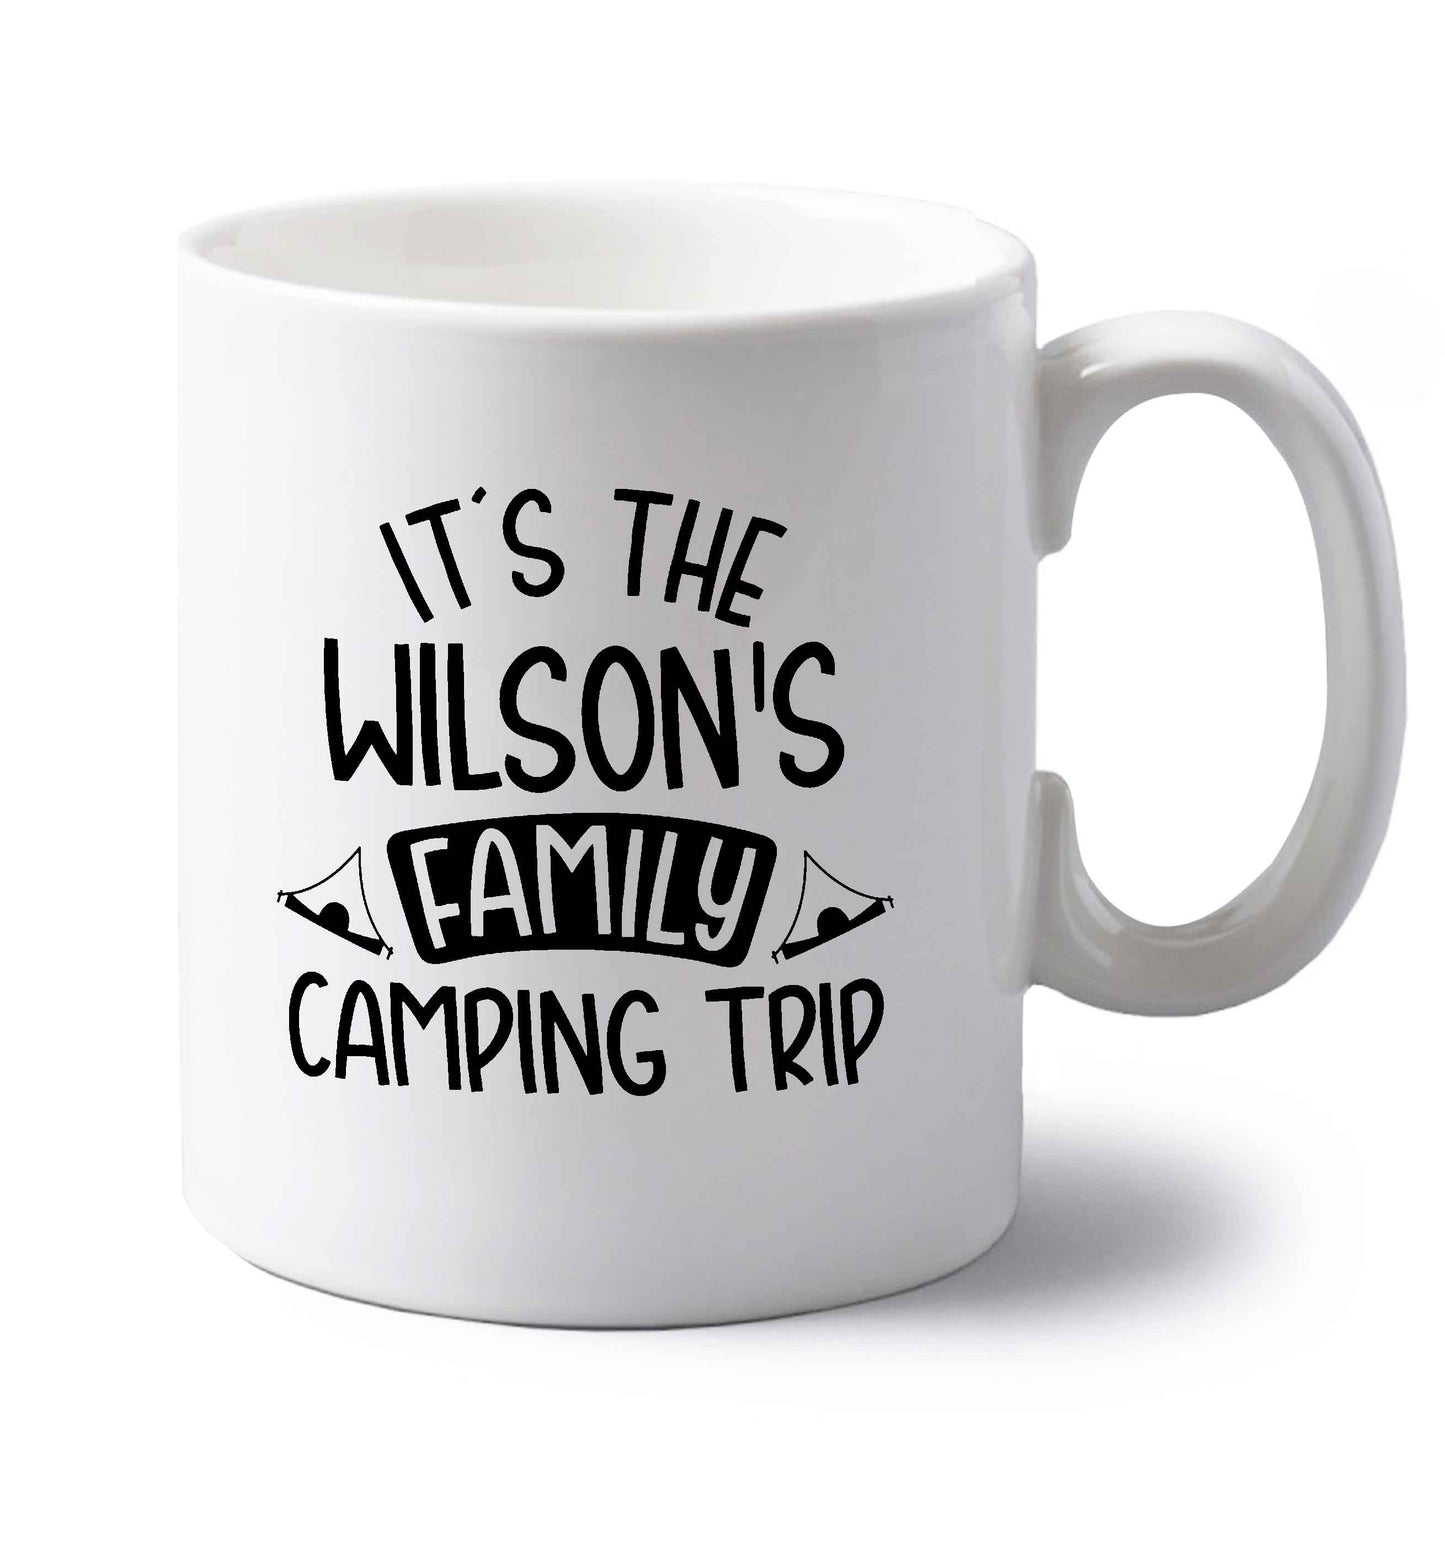 It's the Wilson's family camping trip personalised left handed white ceramic mug 